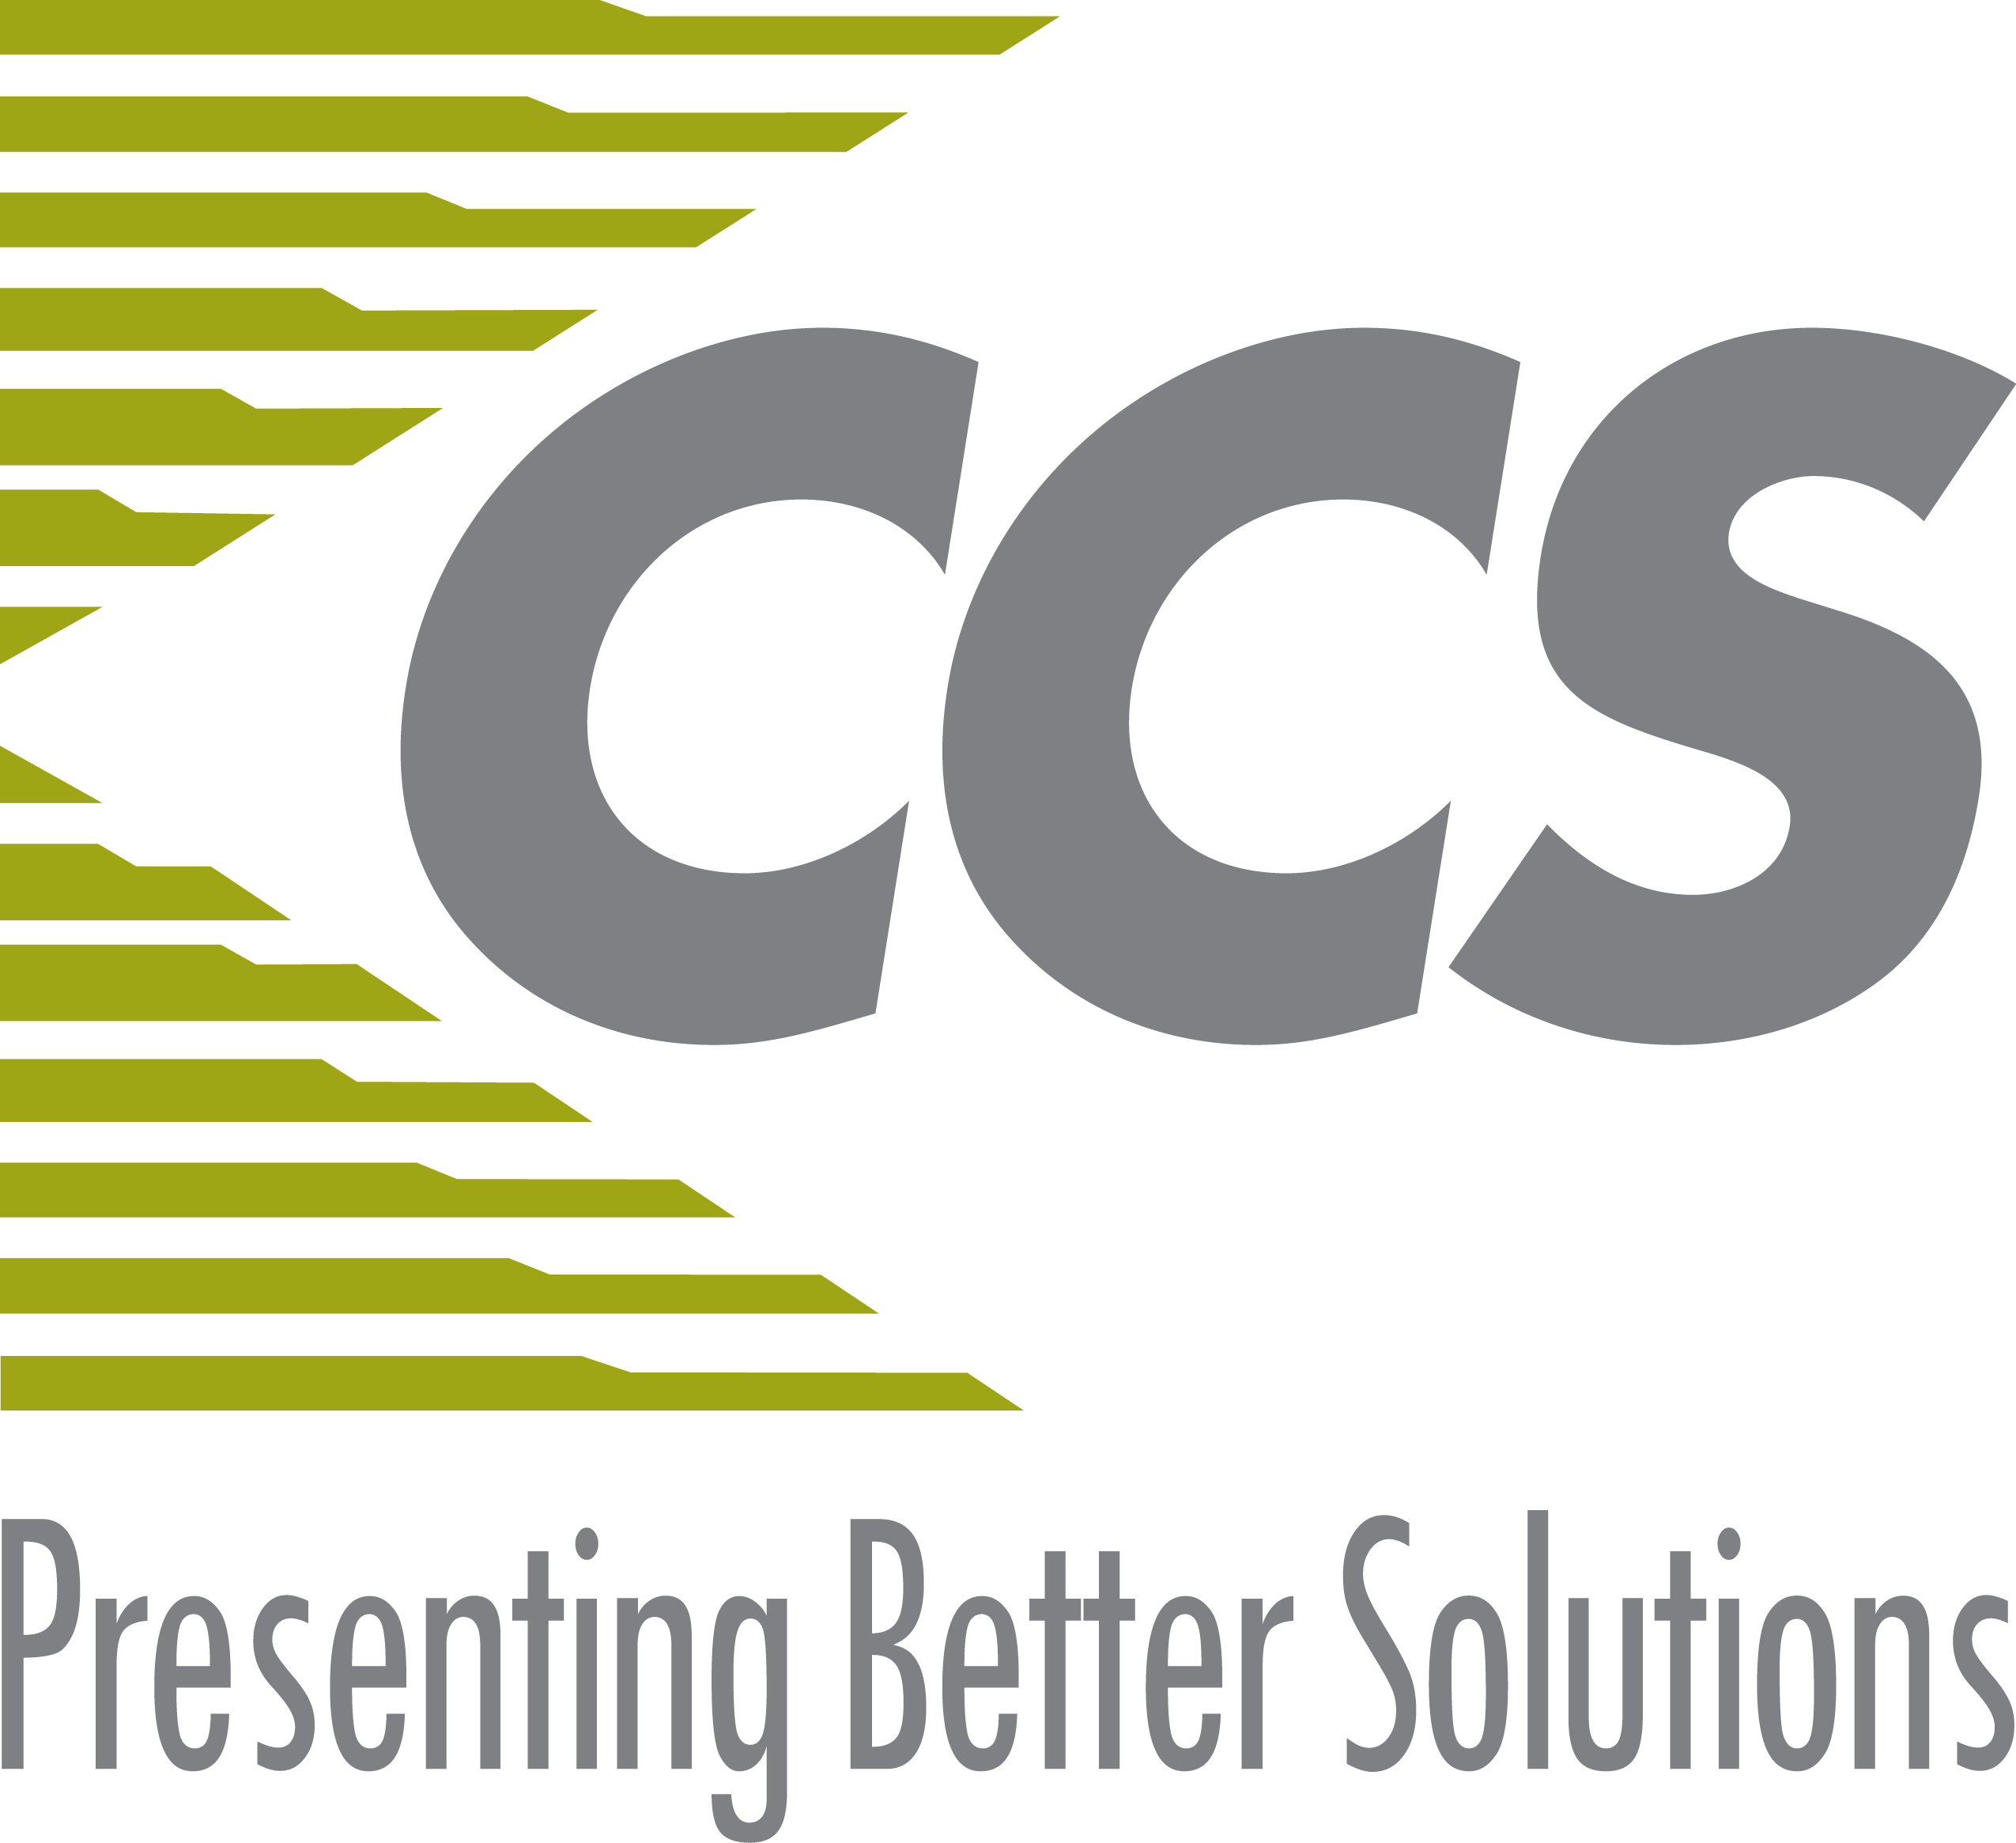 CCS Logo - Ccs Southeast Doral Chamber Of Commerce Logo. The Doral Chamber